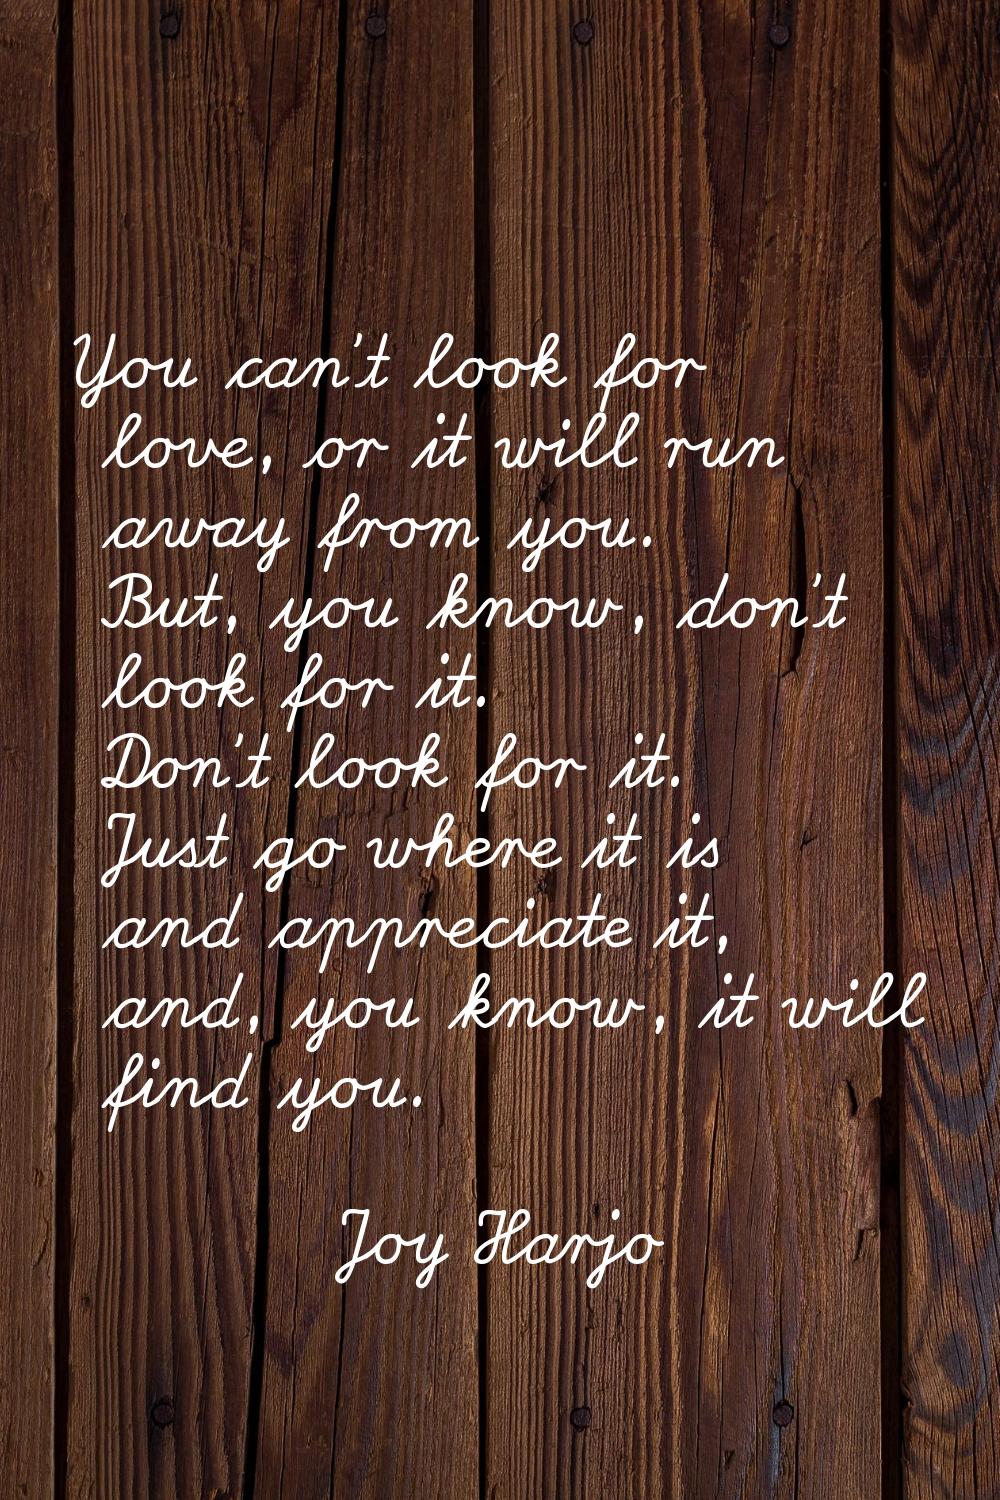 You can't look for love, or it will run away from you. But, you know, don't look for it. Don't look